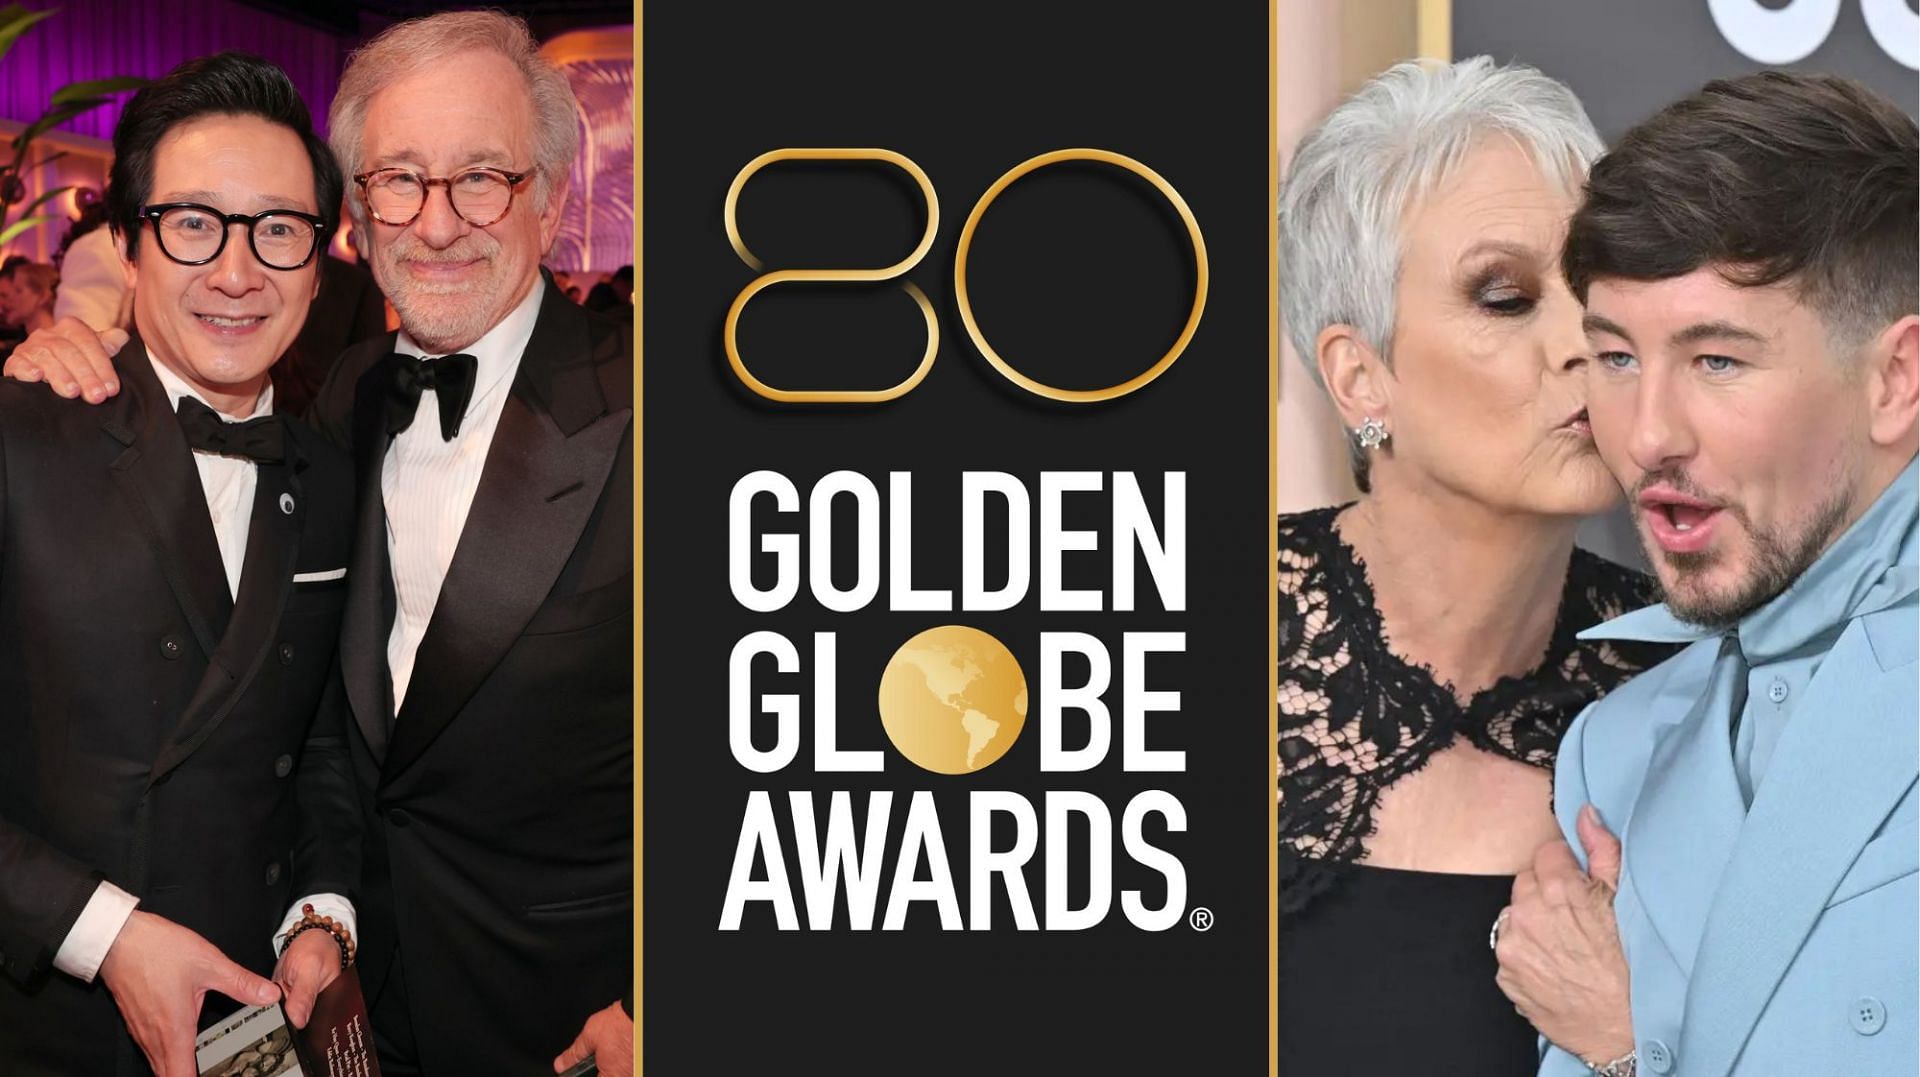 Top 7 Golden Globe moments in photos (Image via Christopher Polk/ Frederick J. Brown/ Getty)